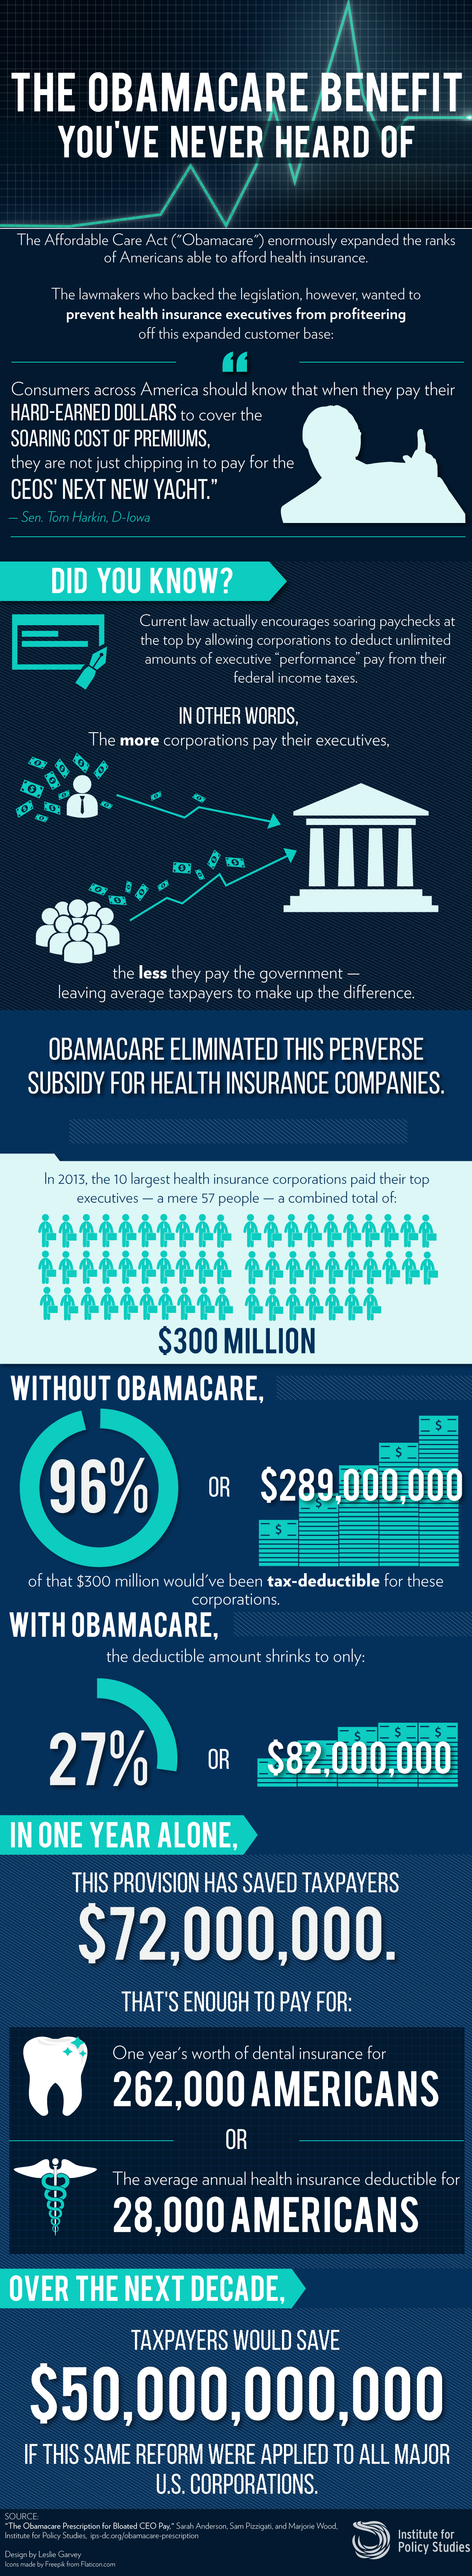 INFOGRAPHIC: The Obamacare Benefit You’ve Never Heard Of